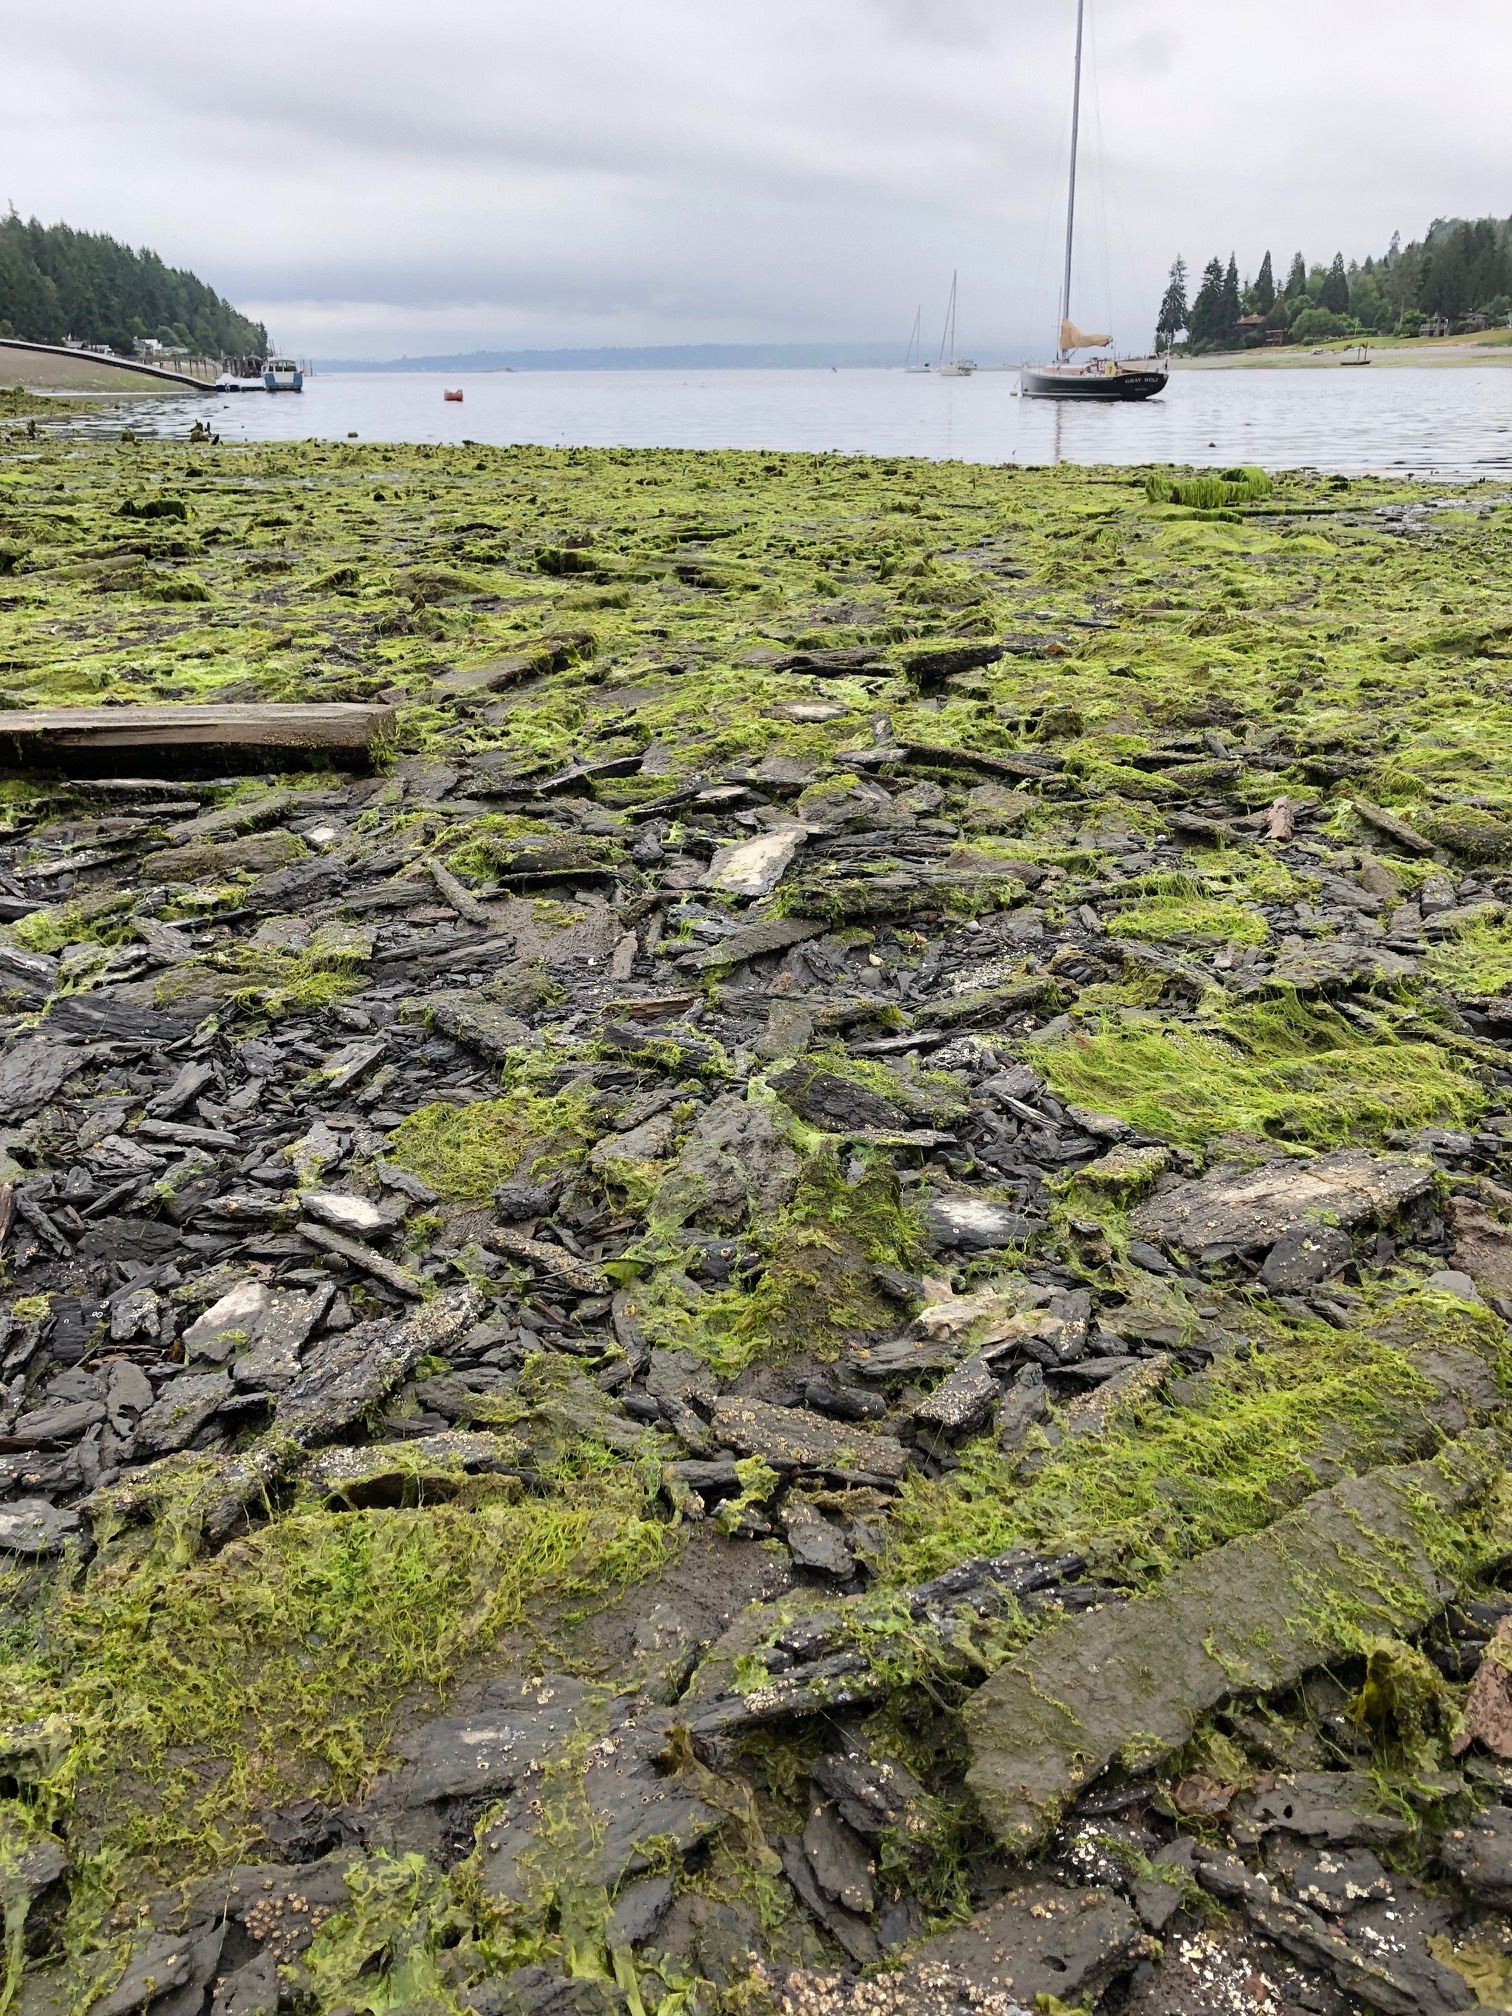 A beach at low tide littered with wood pieces that are covered in seaweed. The water and a boat are in the distance.